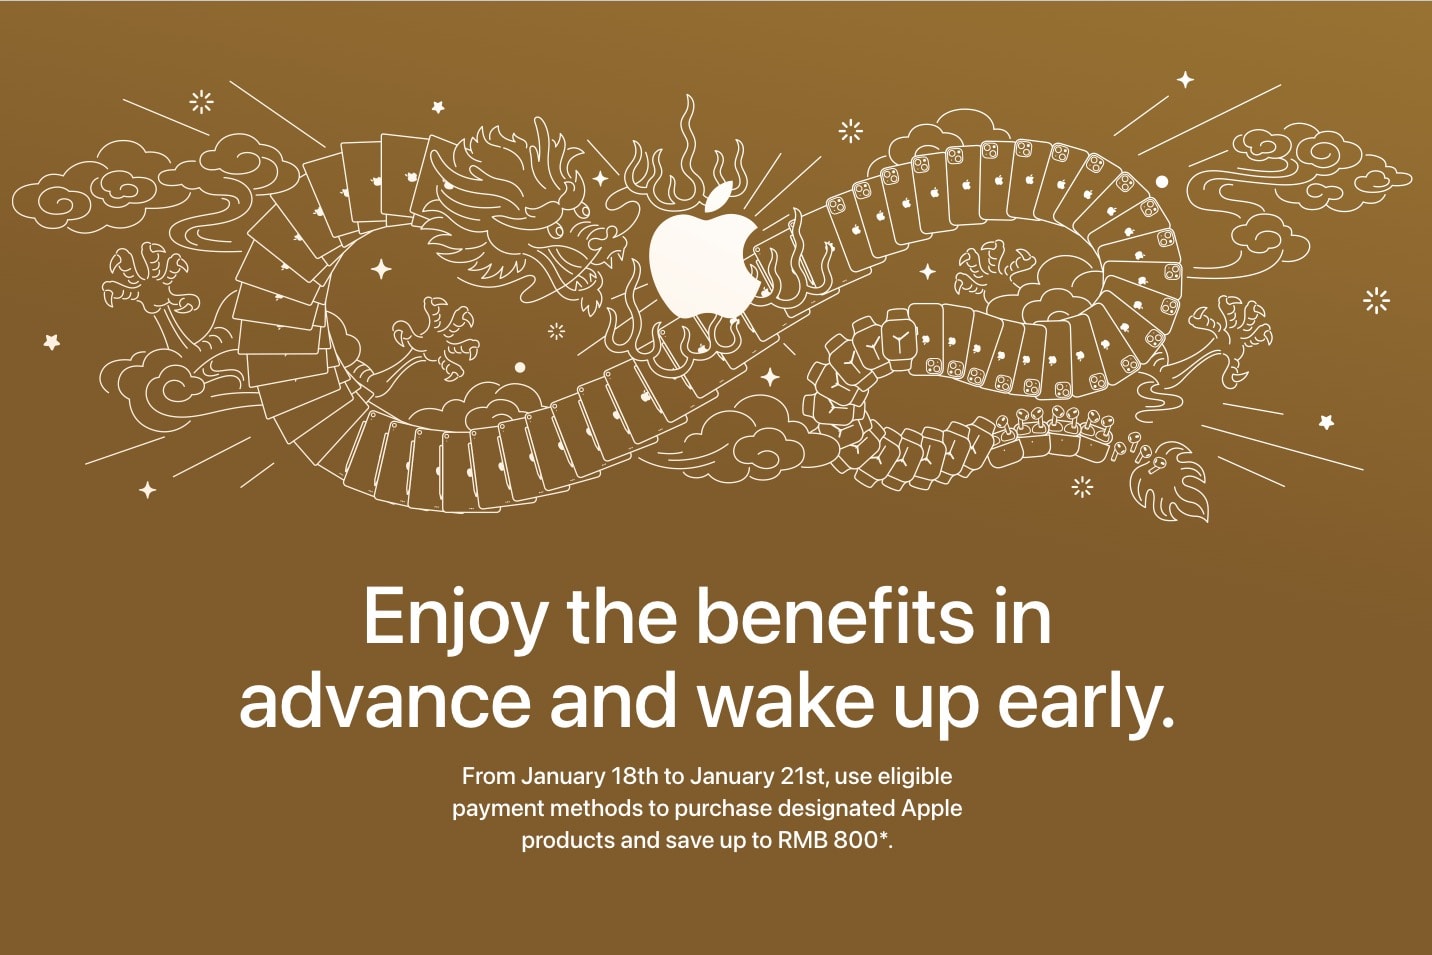 Apple's Lunar New Year promo in China